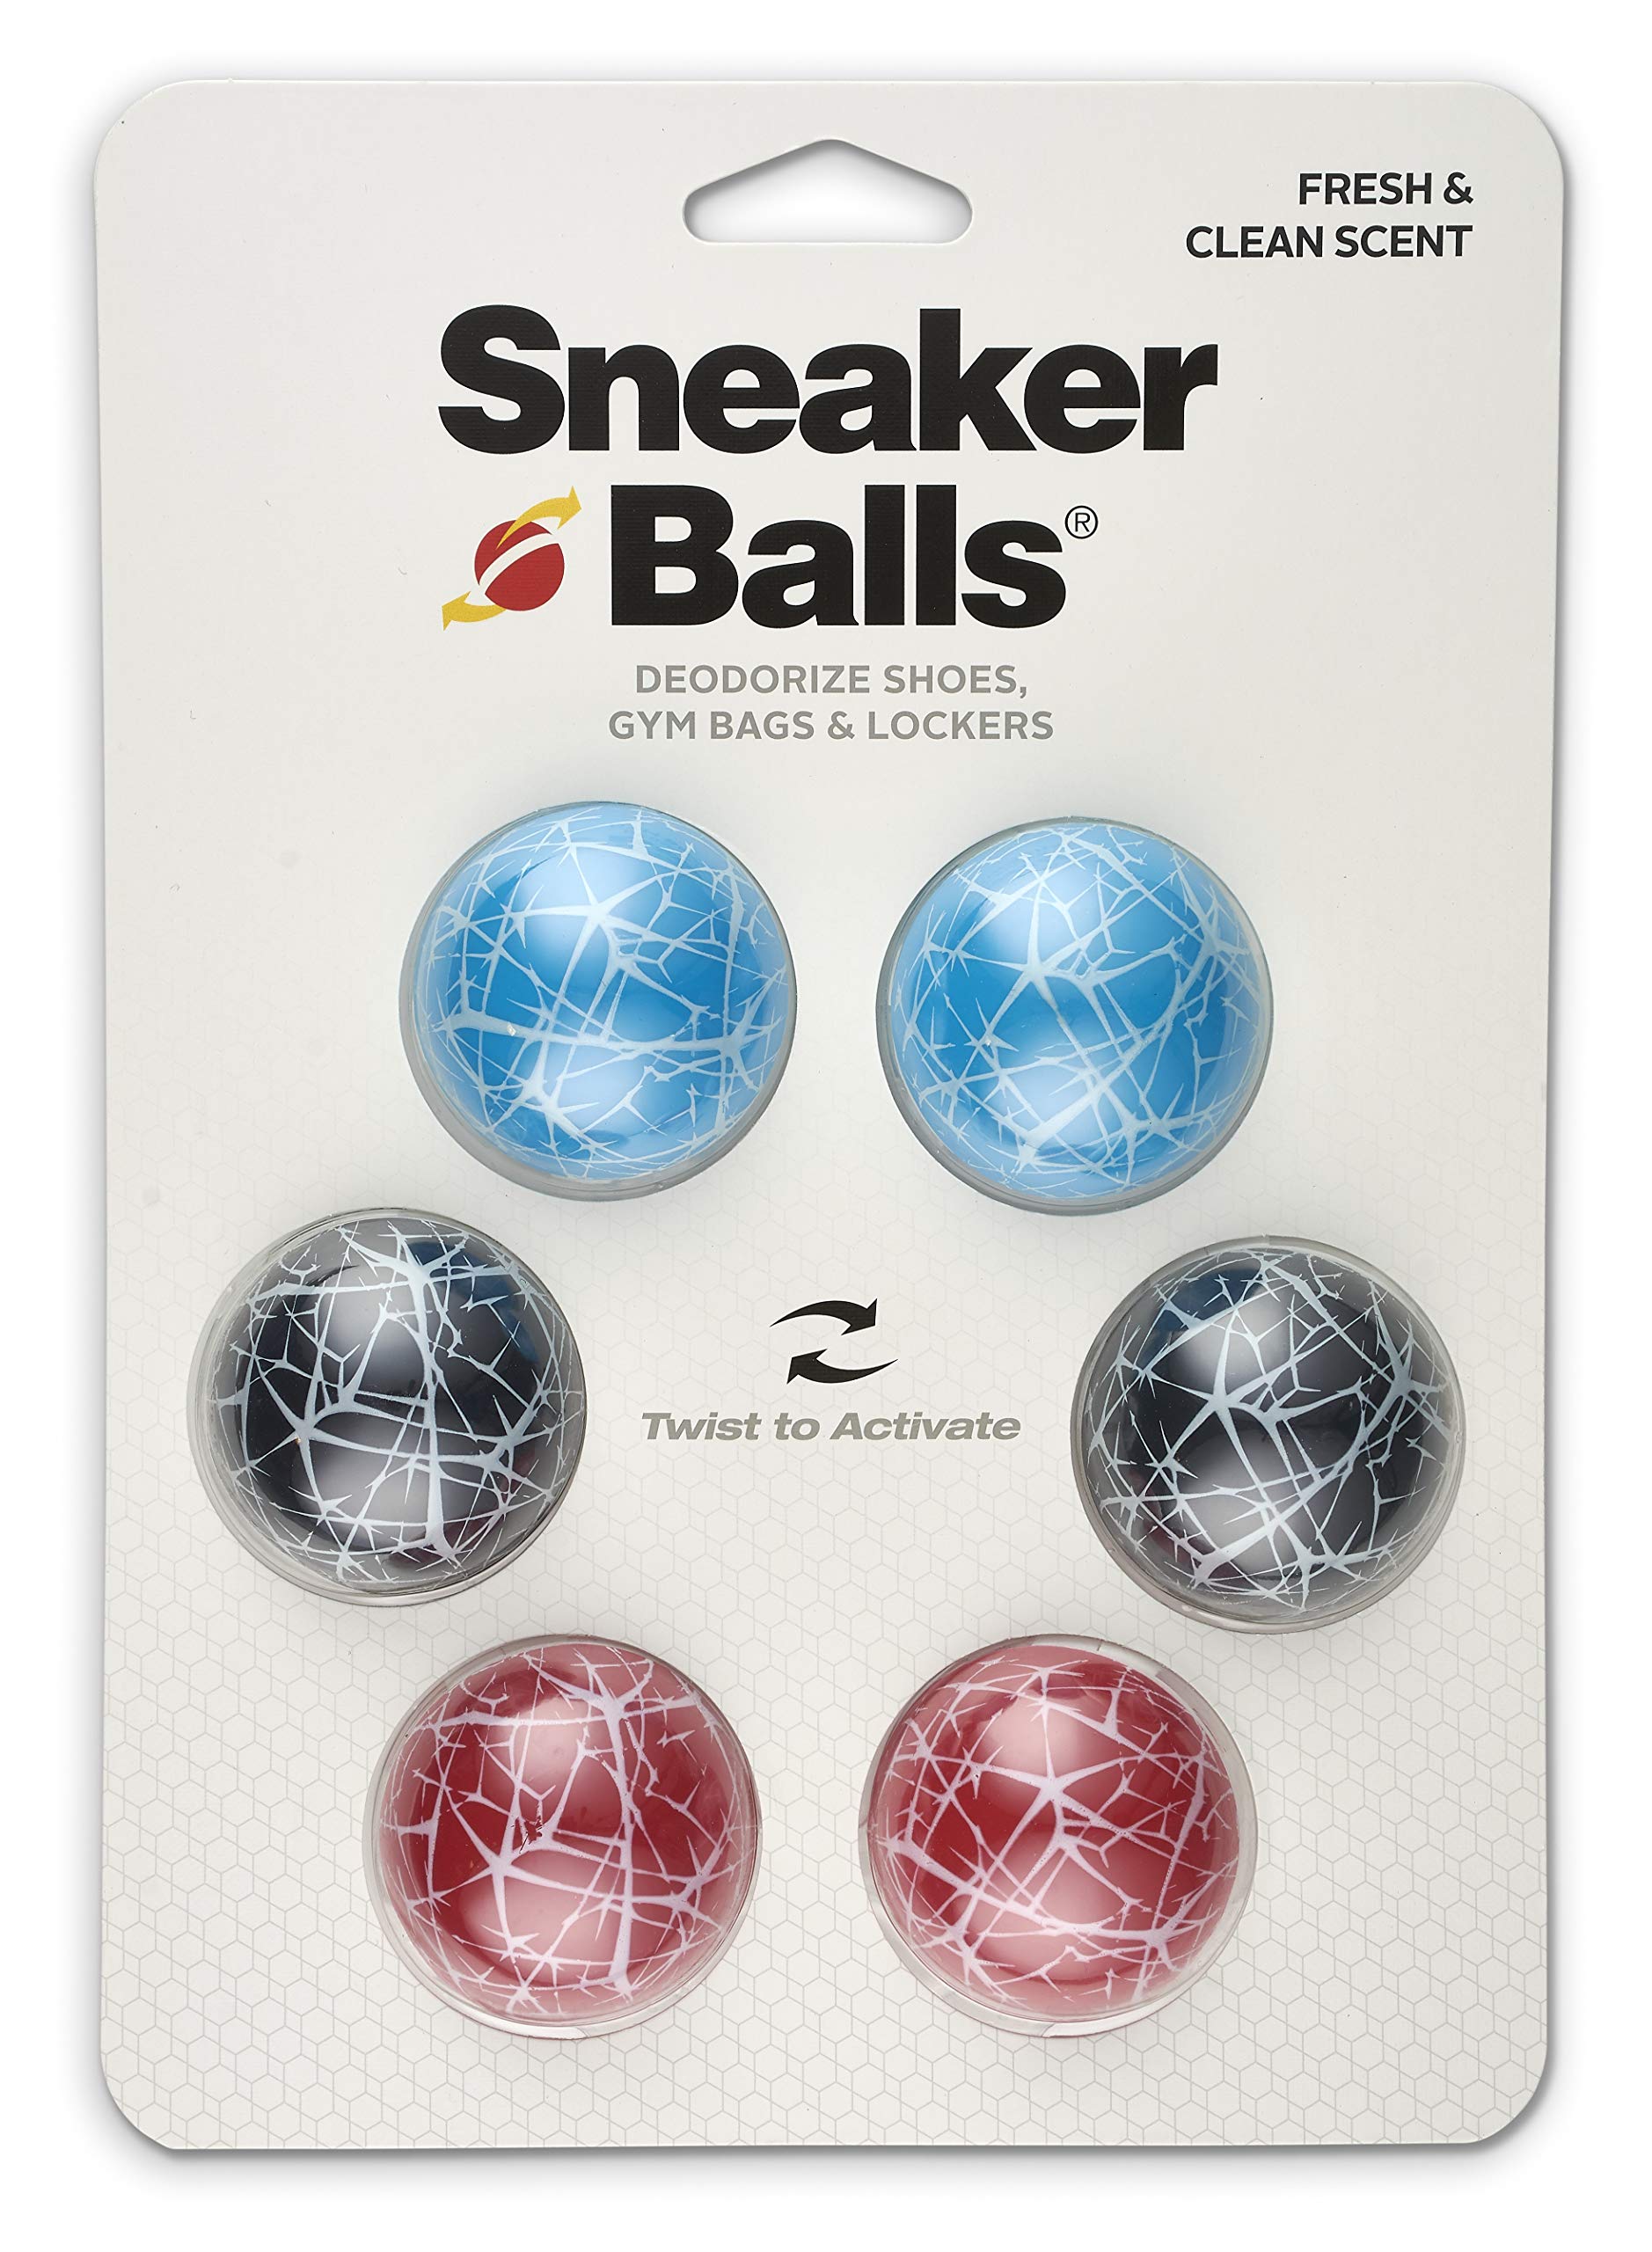 6-Pack Sof Sole Sneaker Balls Shoe, Gym Bag, and Locker Deodorizer $5.00 + Free Shipping w/ Prime or on $35+